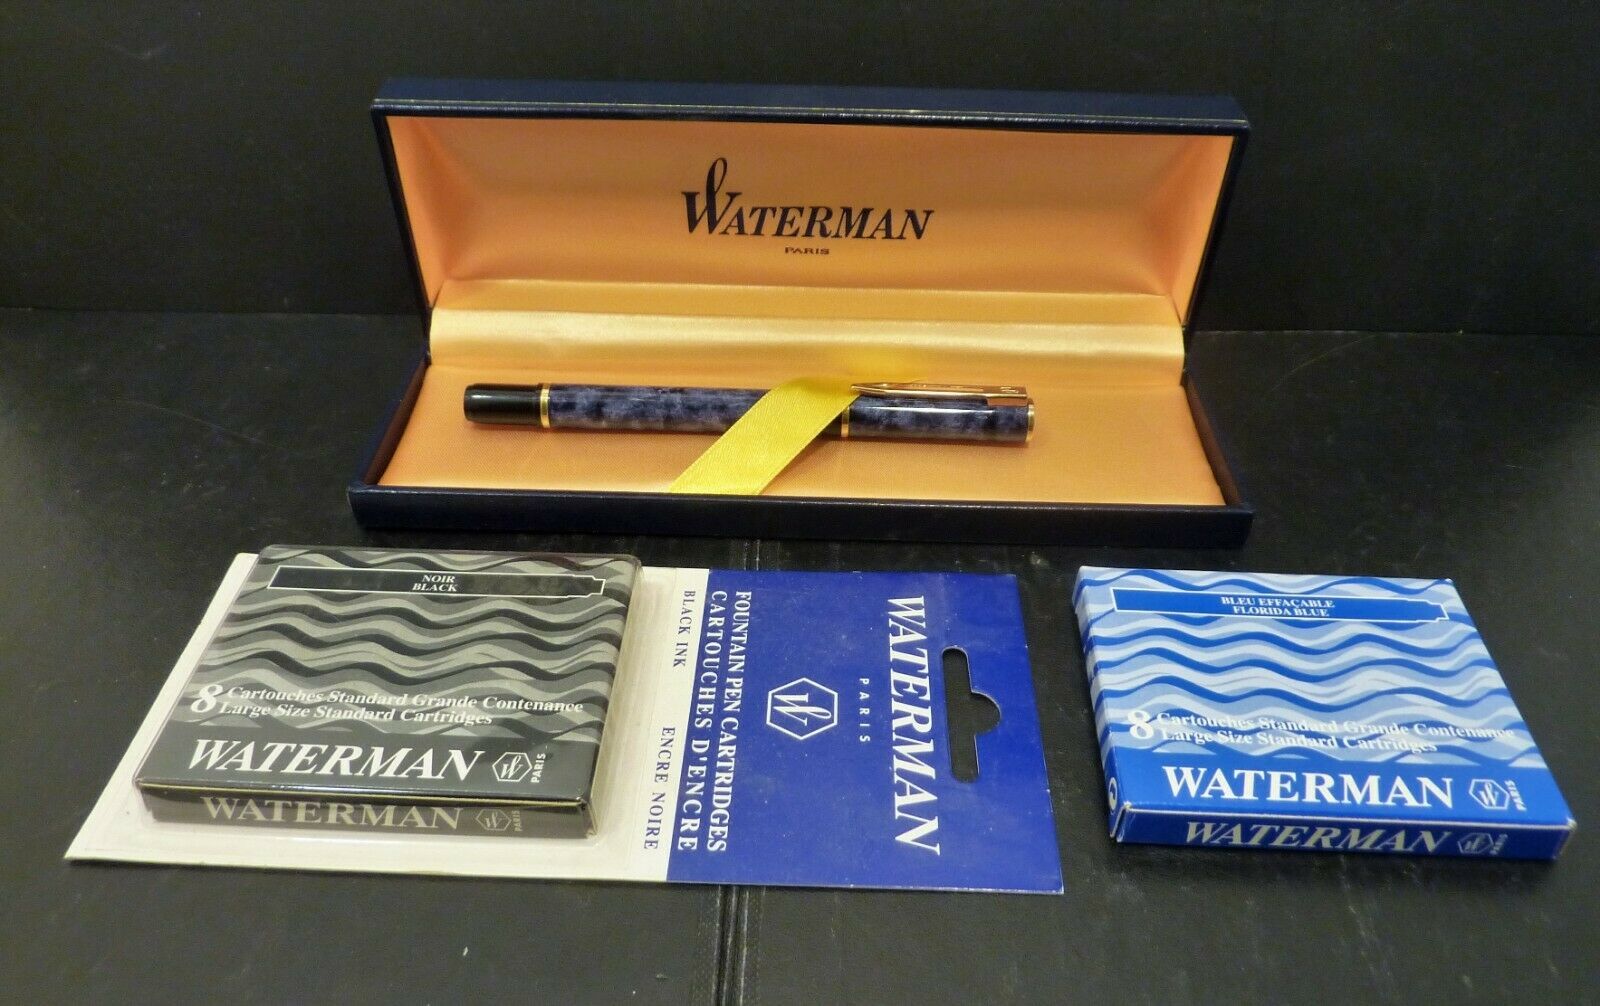 Waterman Paris Fountain Pen with Black and Blue Cartridges - $142.40